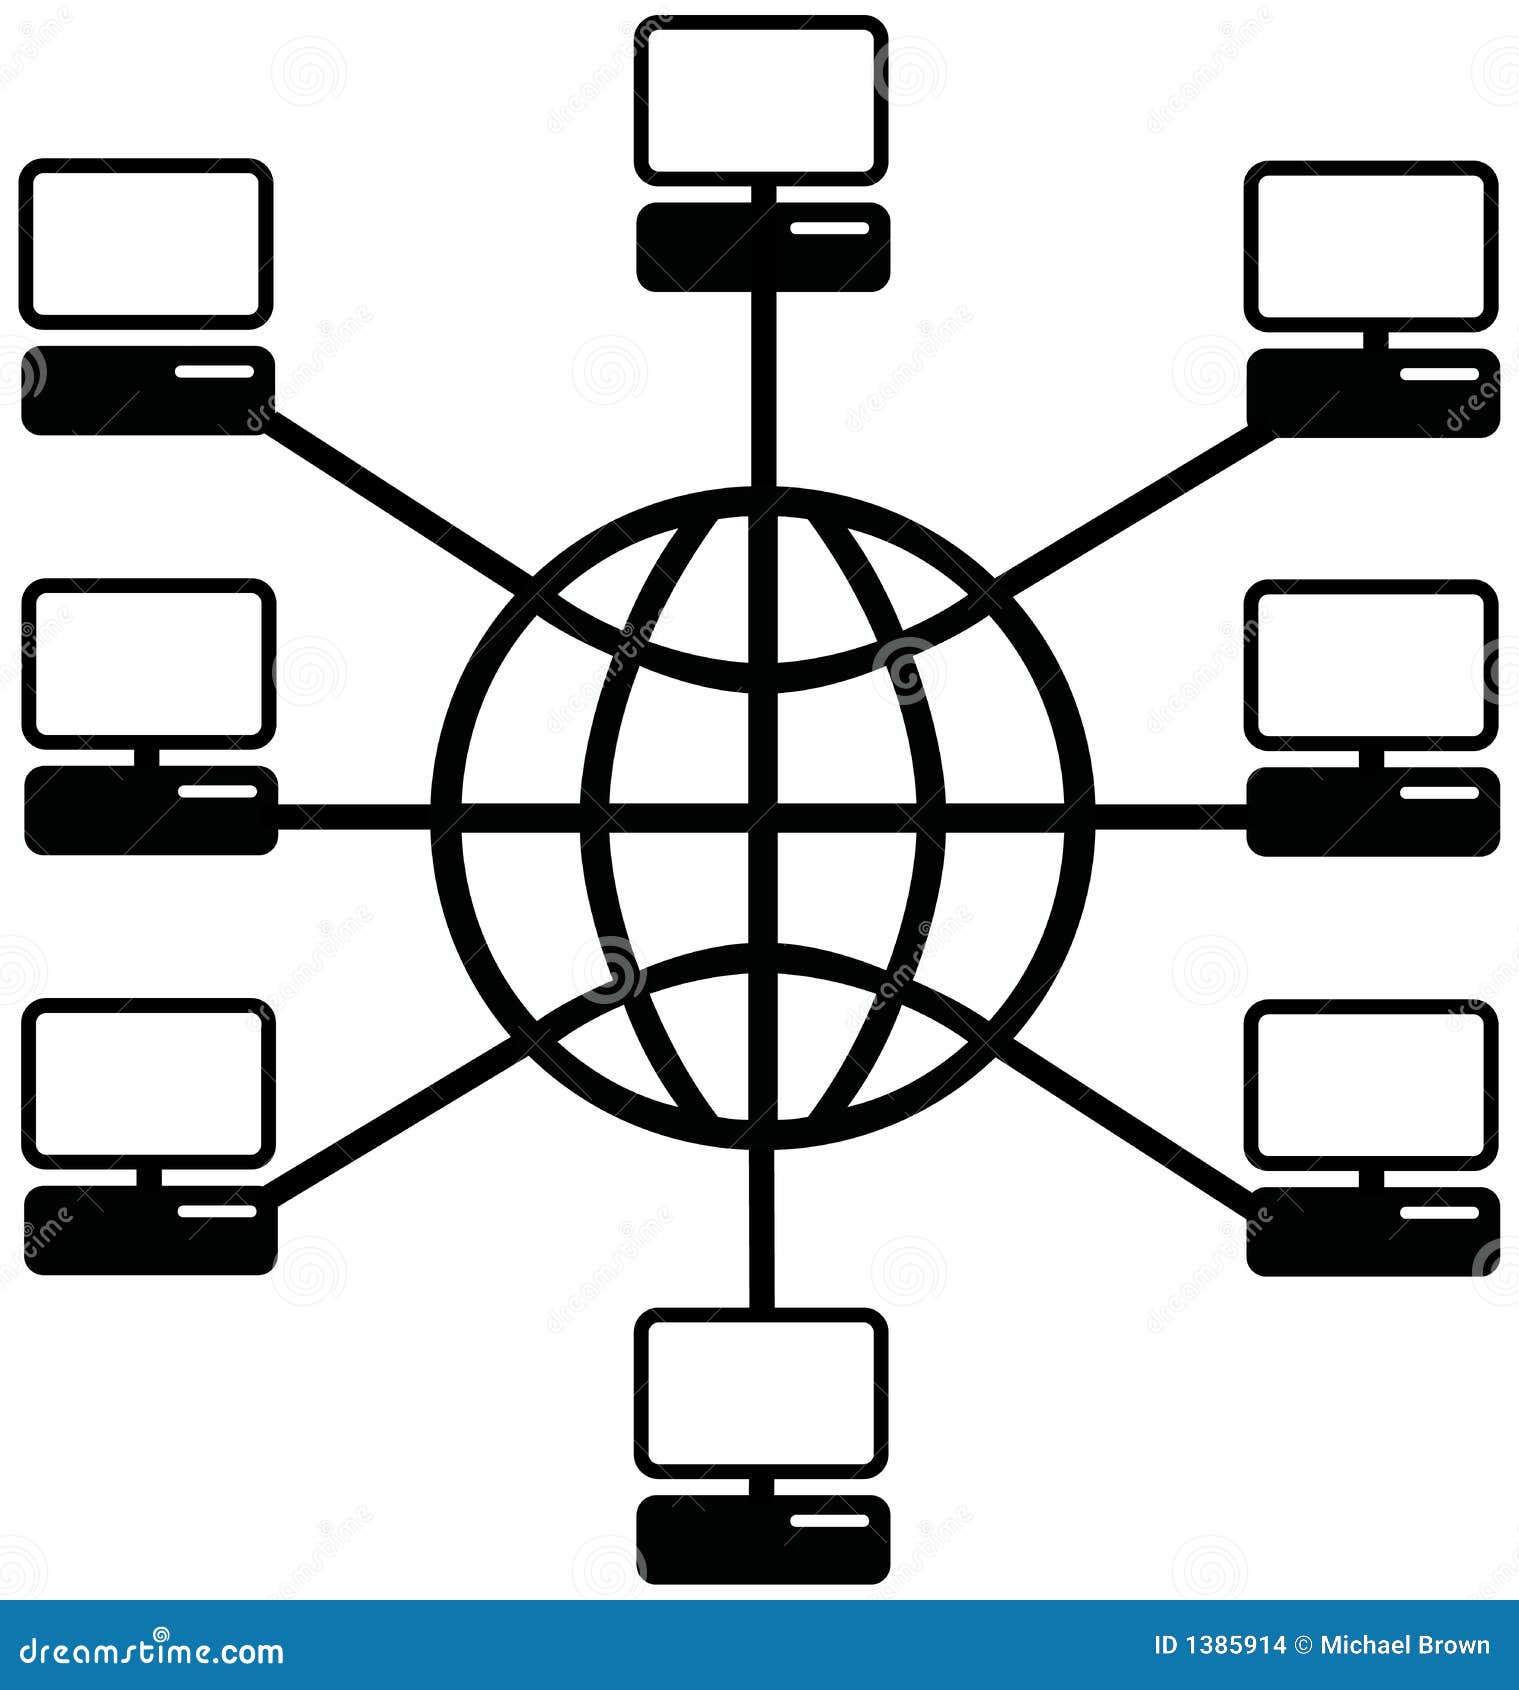 computer networks clipart - photo #49